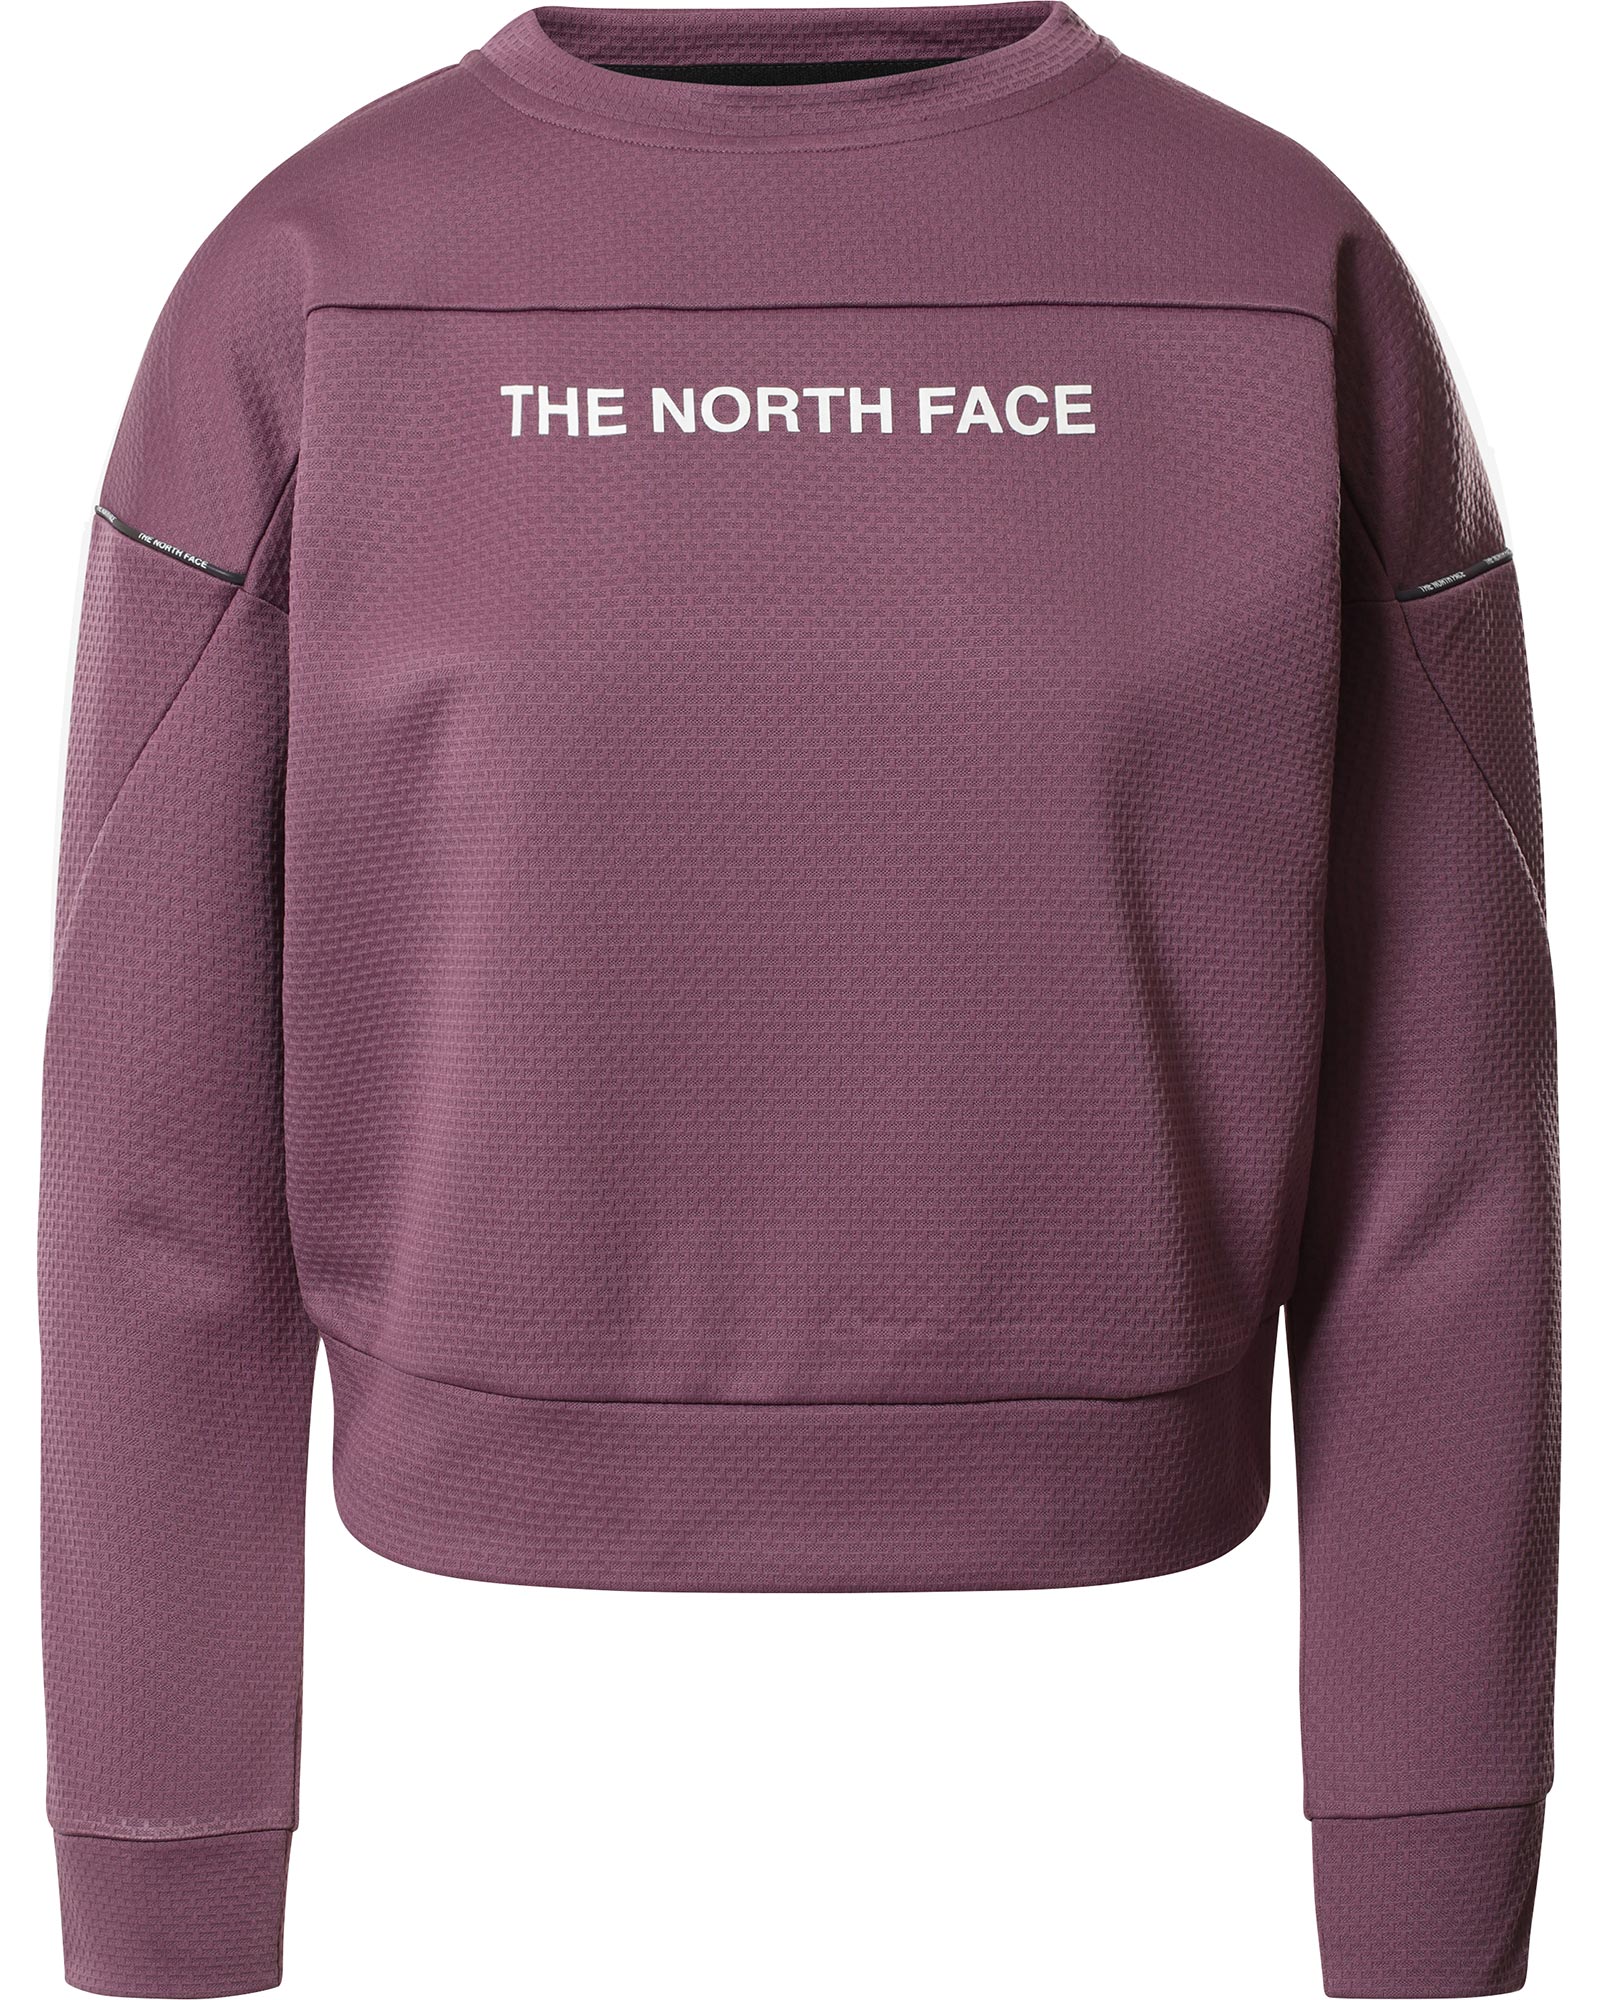 Product image of The North Face Mountain Athletics Women's Pullover